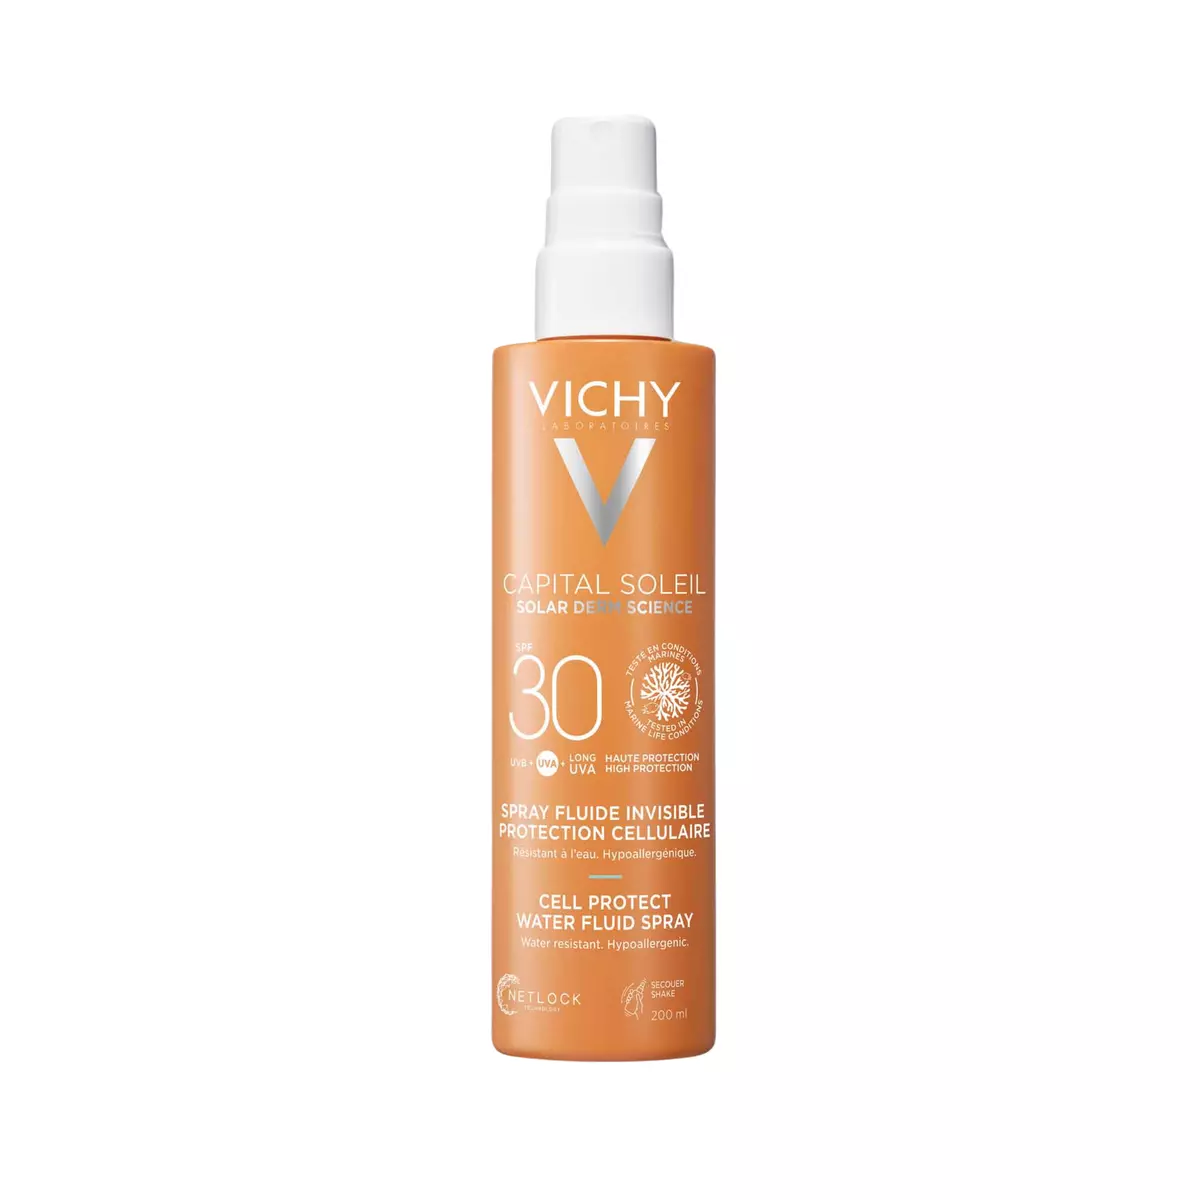 VICHY Capital soleil Spray fluide invisible protection cellulaire SPF30 200ml